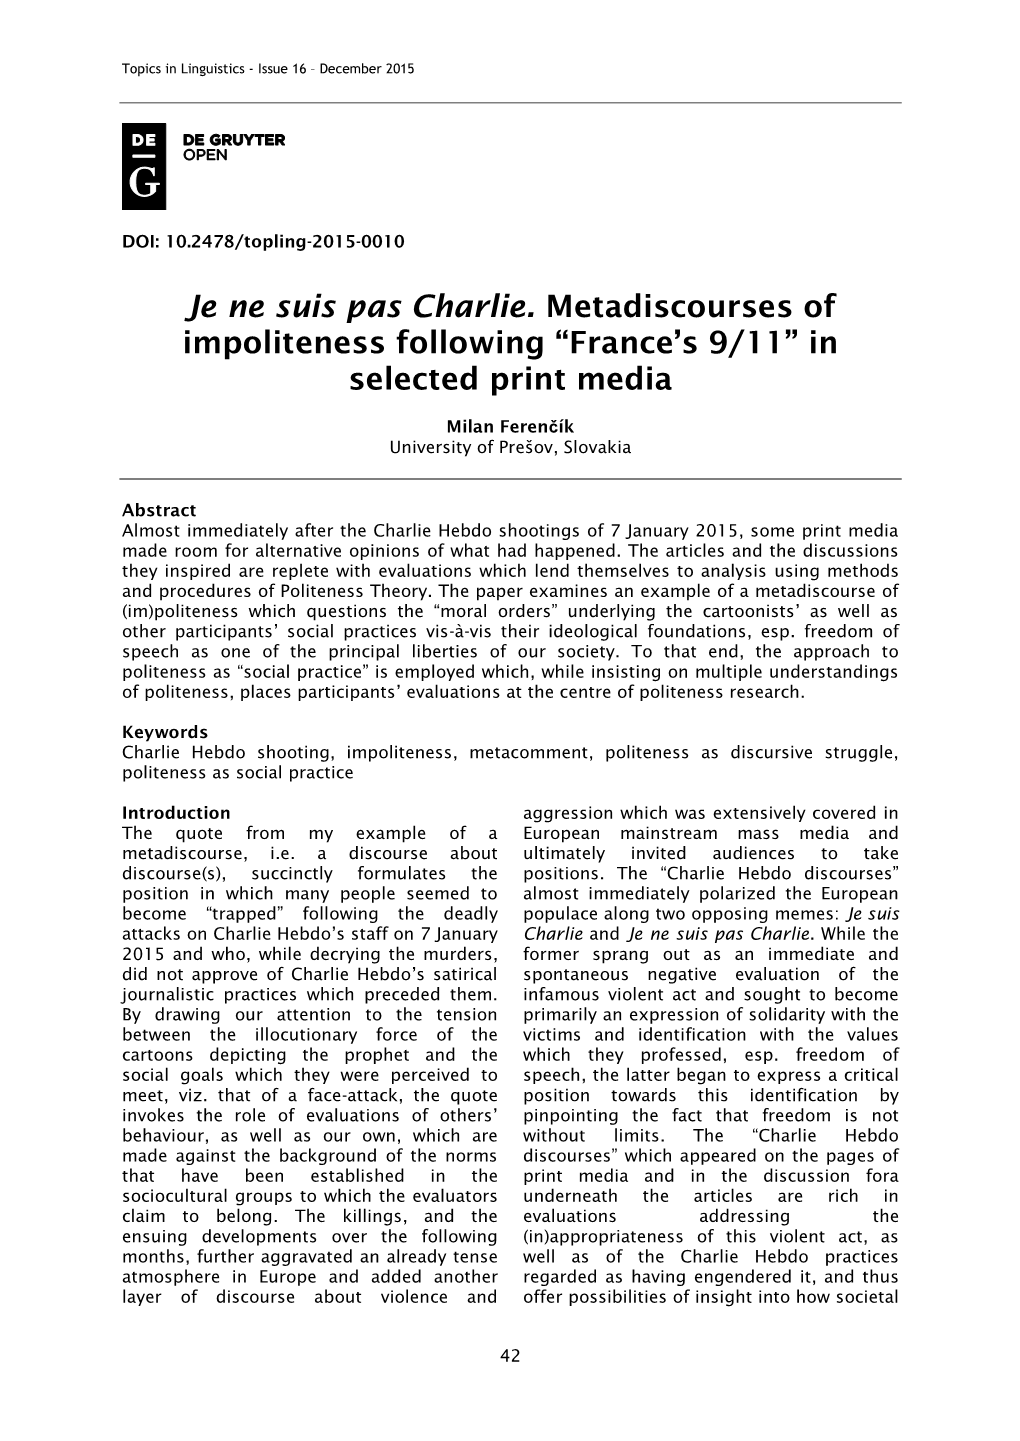 Je Ne Suis Pas Charlie. Metadiscourses of Impoliteness Following “France’S 9/11” in Selected Print Media